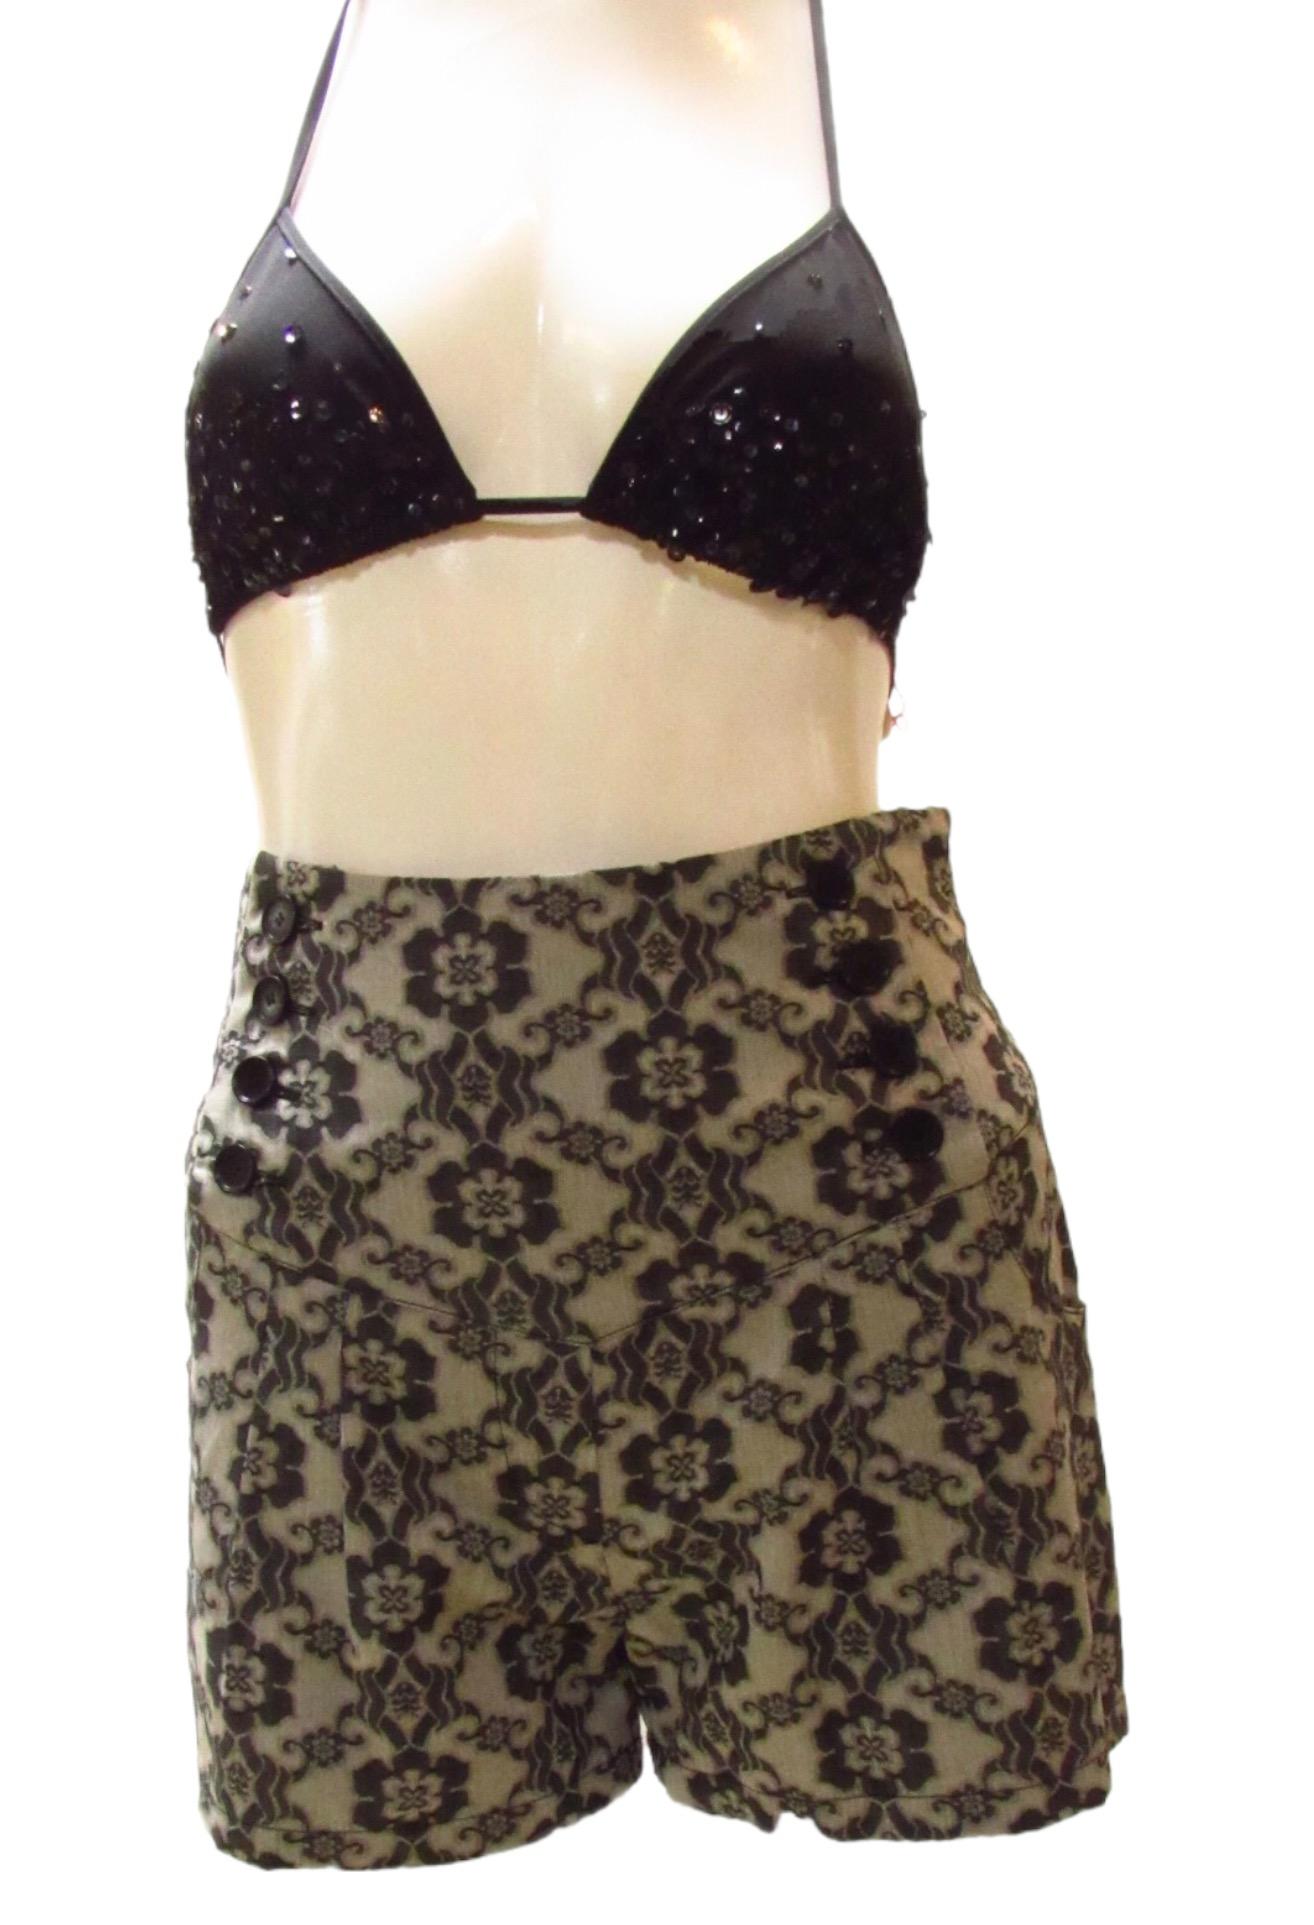 Vintage sailor style shorts from Jean Paul Gaultier feature a fabulous lace-like design, side zip and 